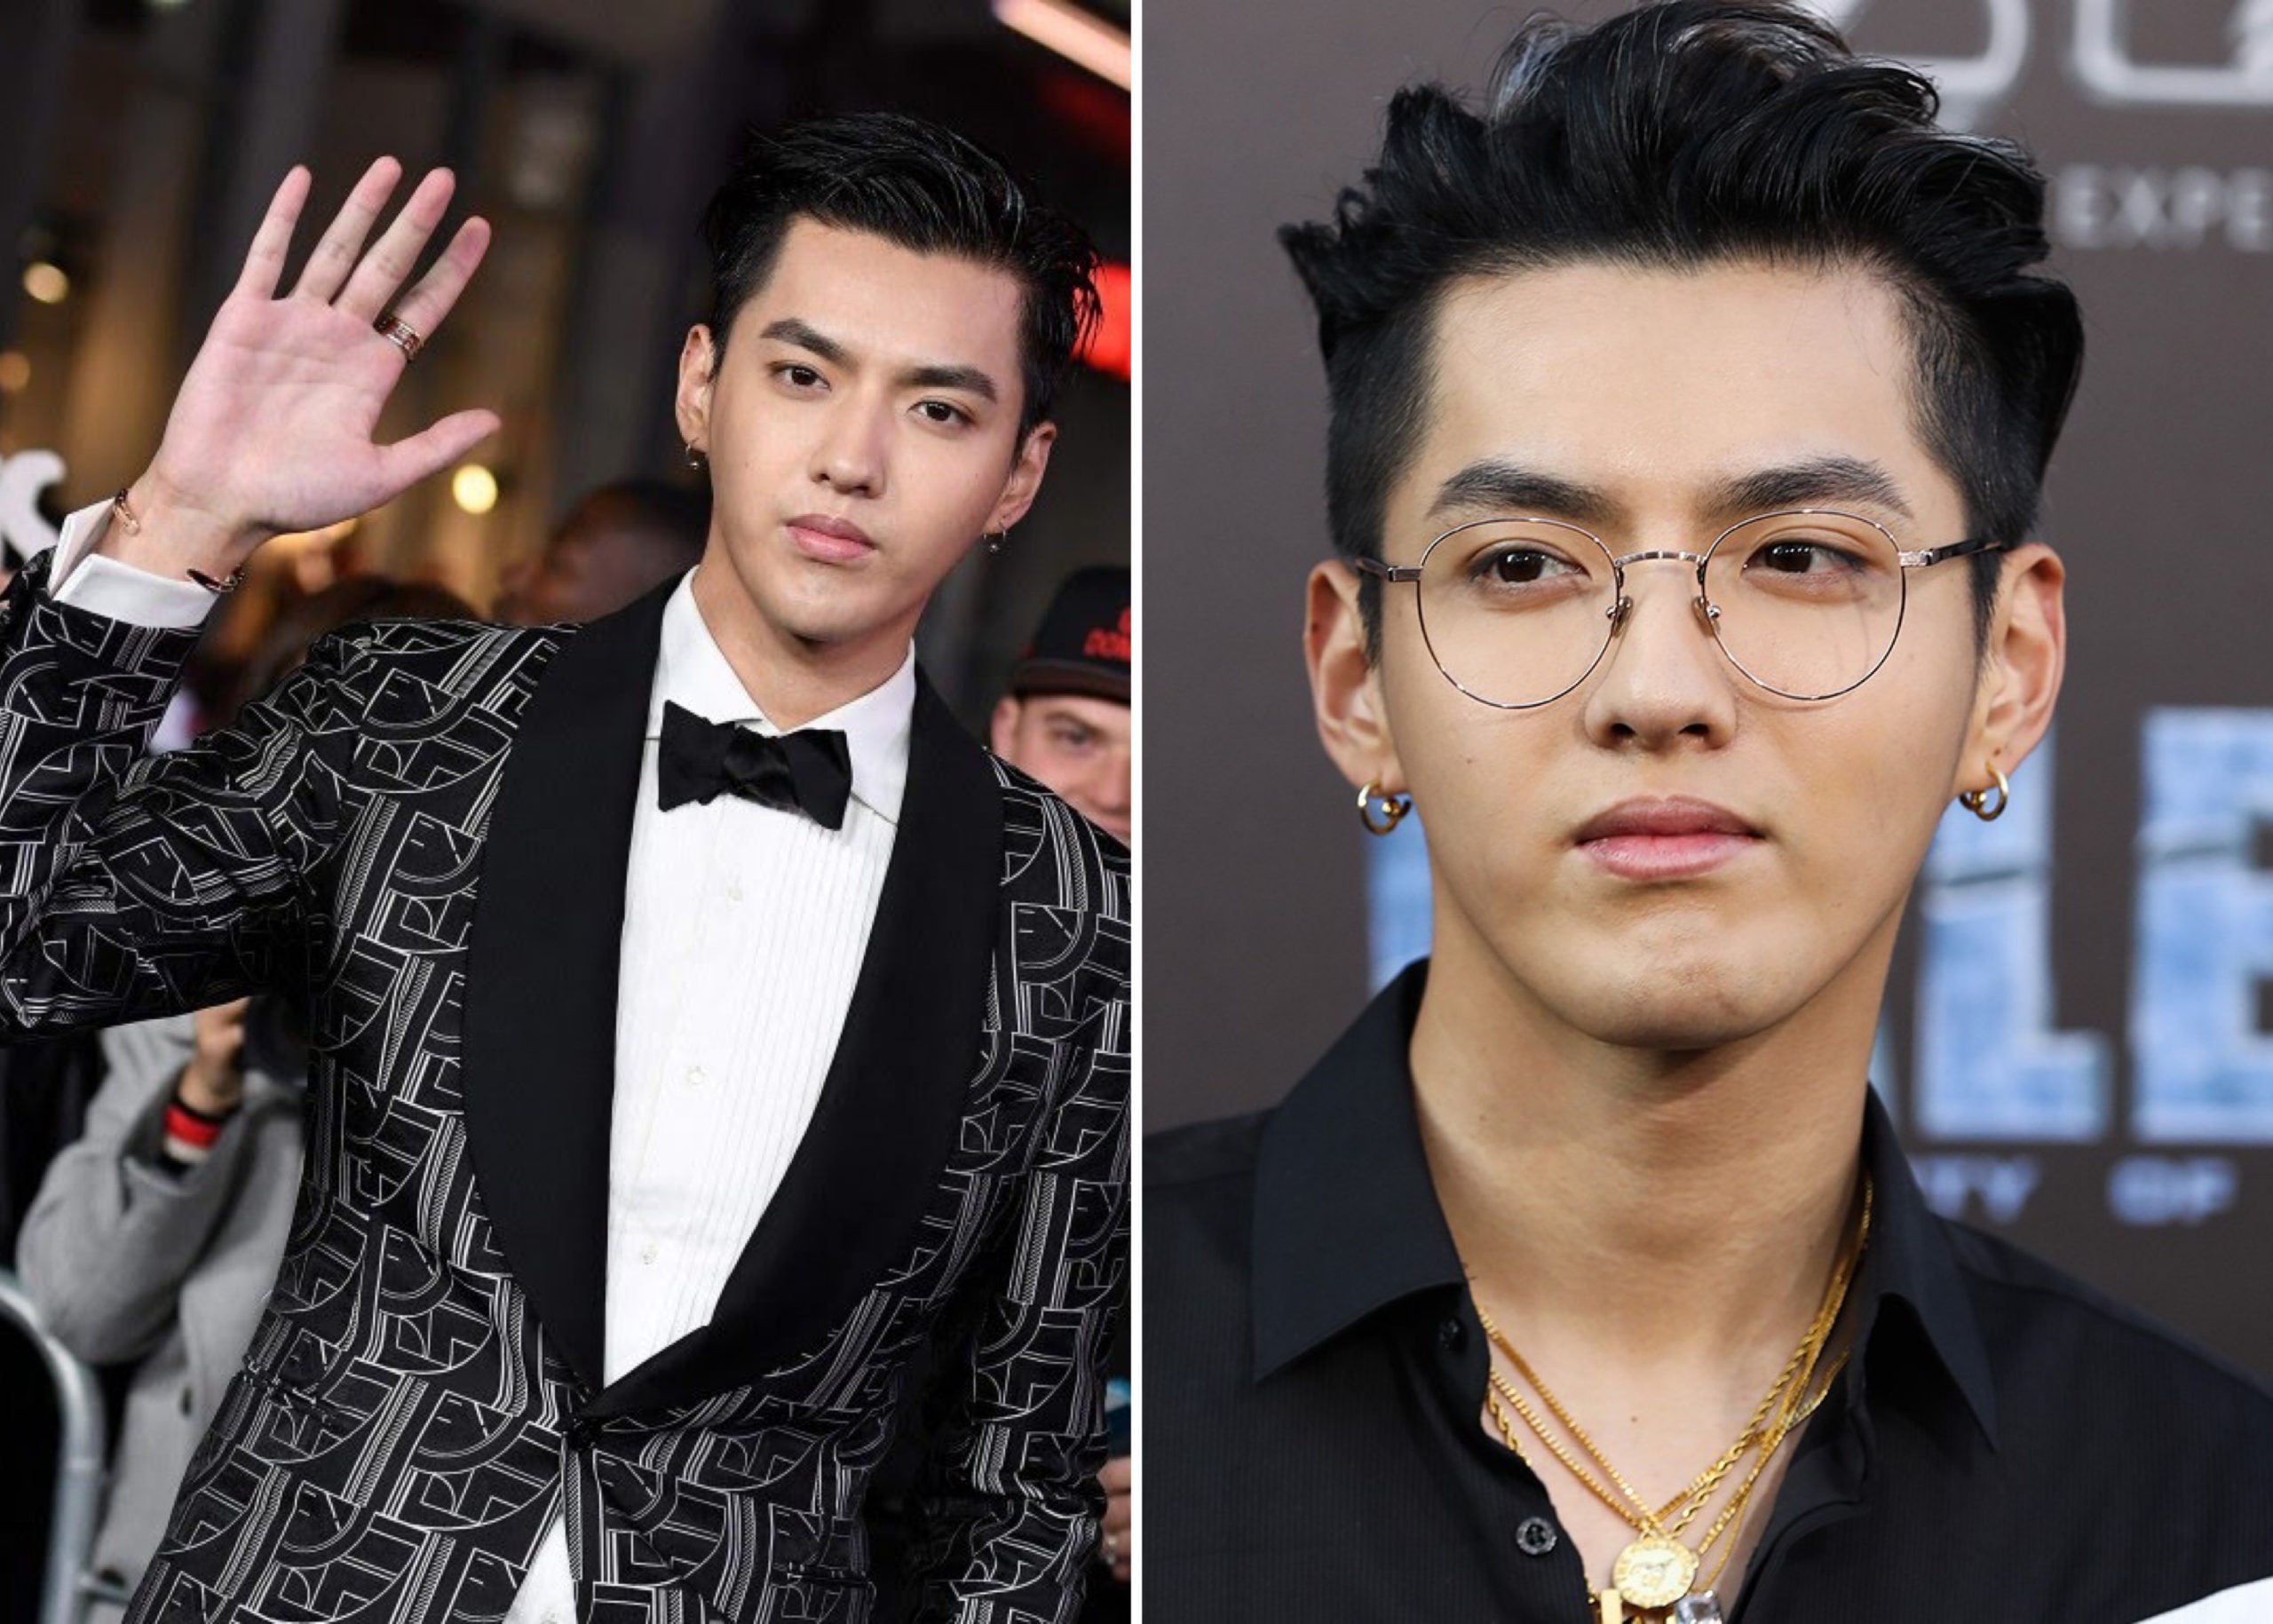 K-Pop Star, Kris Wu Arrested, Charged With Rape